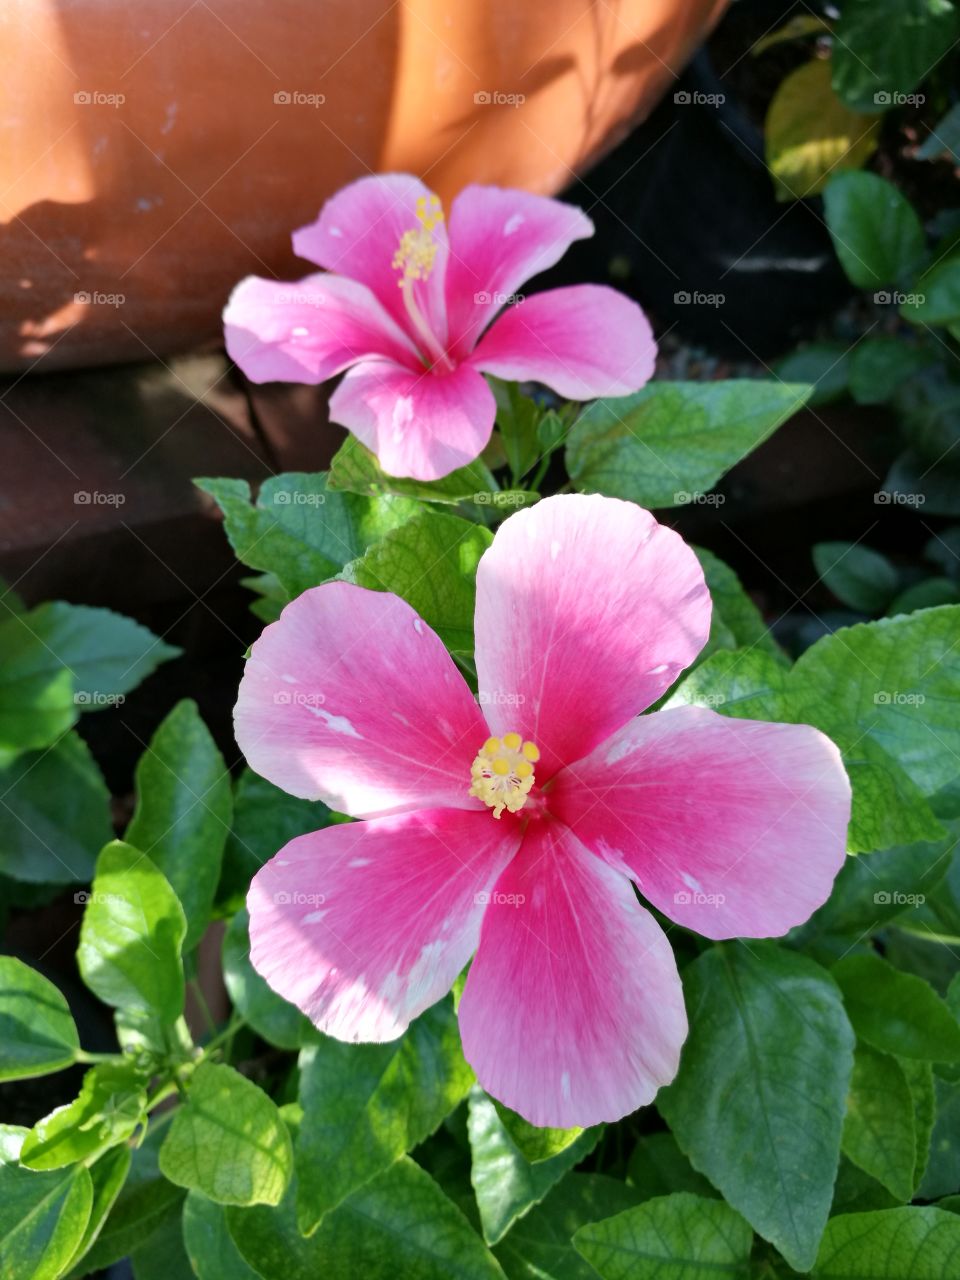 Closeup of two pink hibiscus in sunlight.